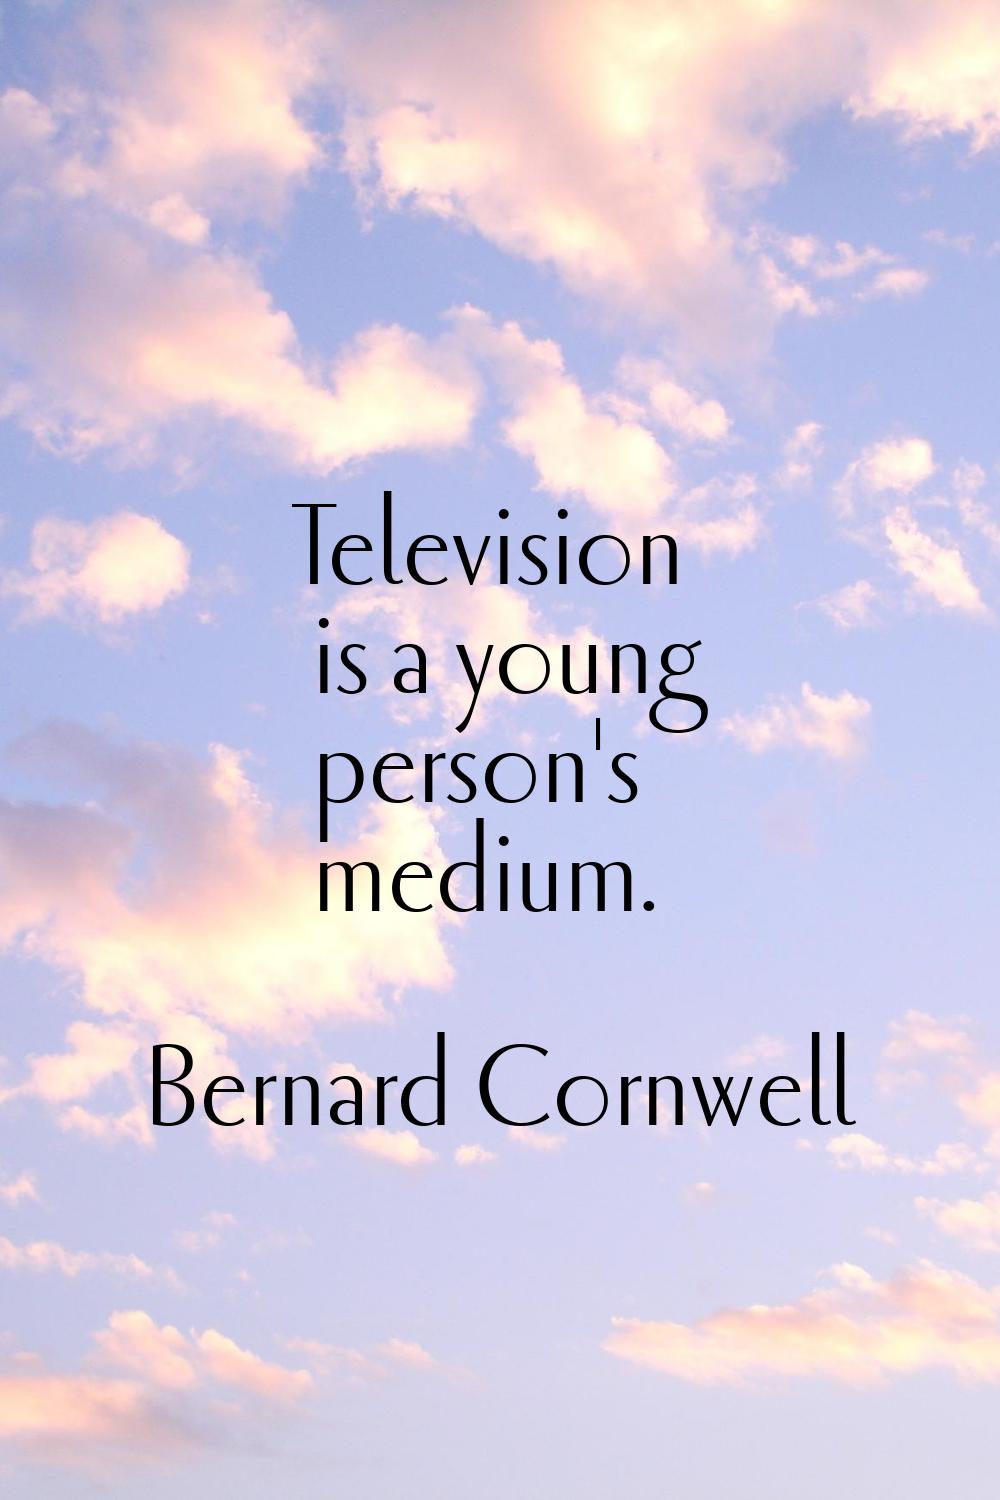 Television is a young person's medium.